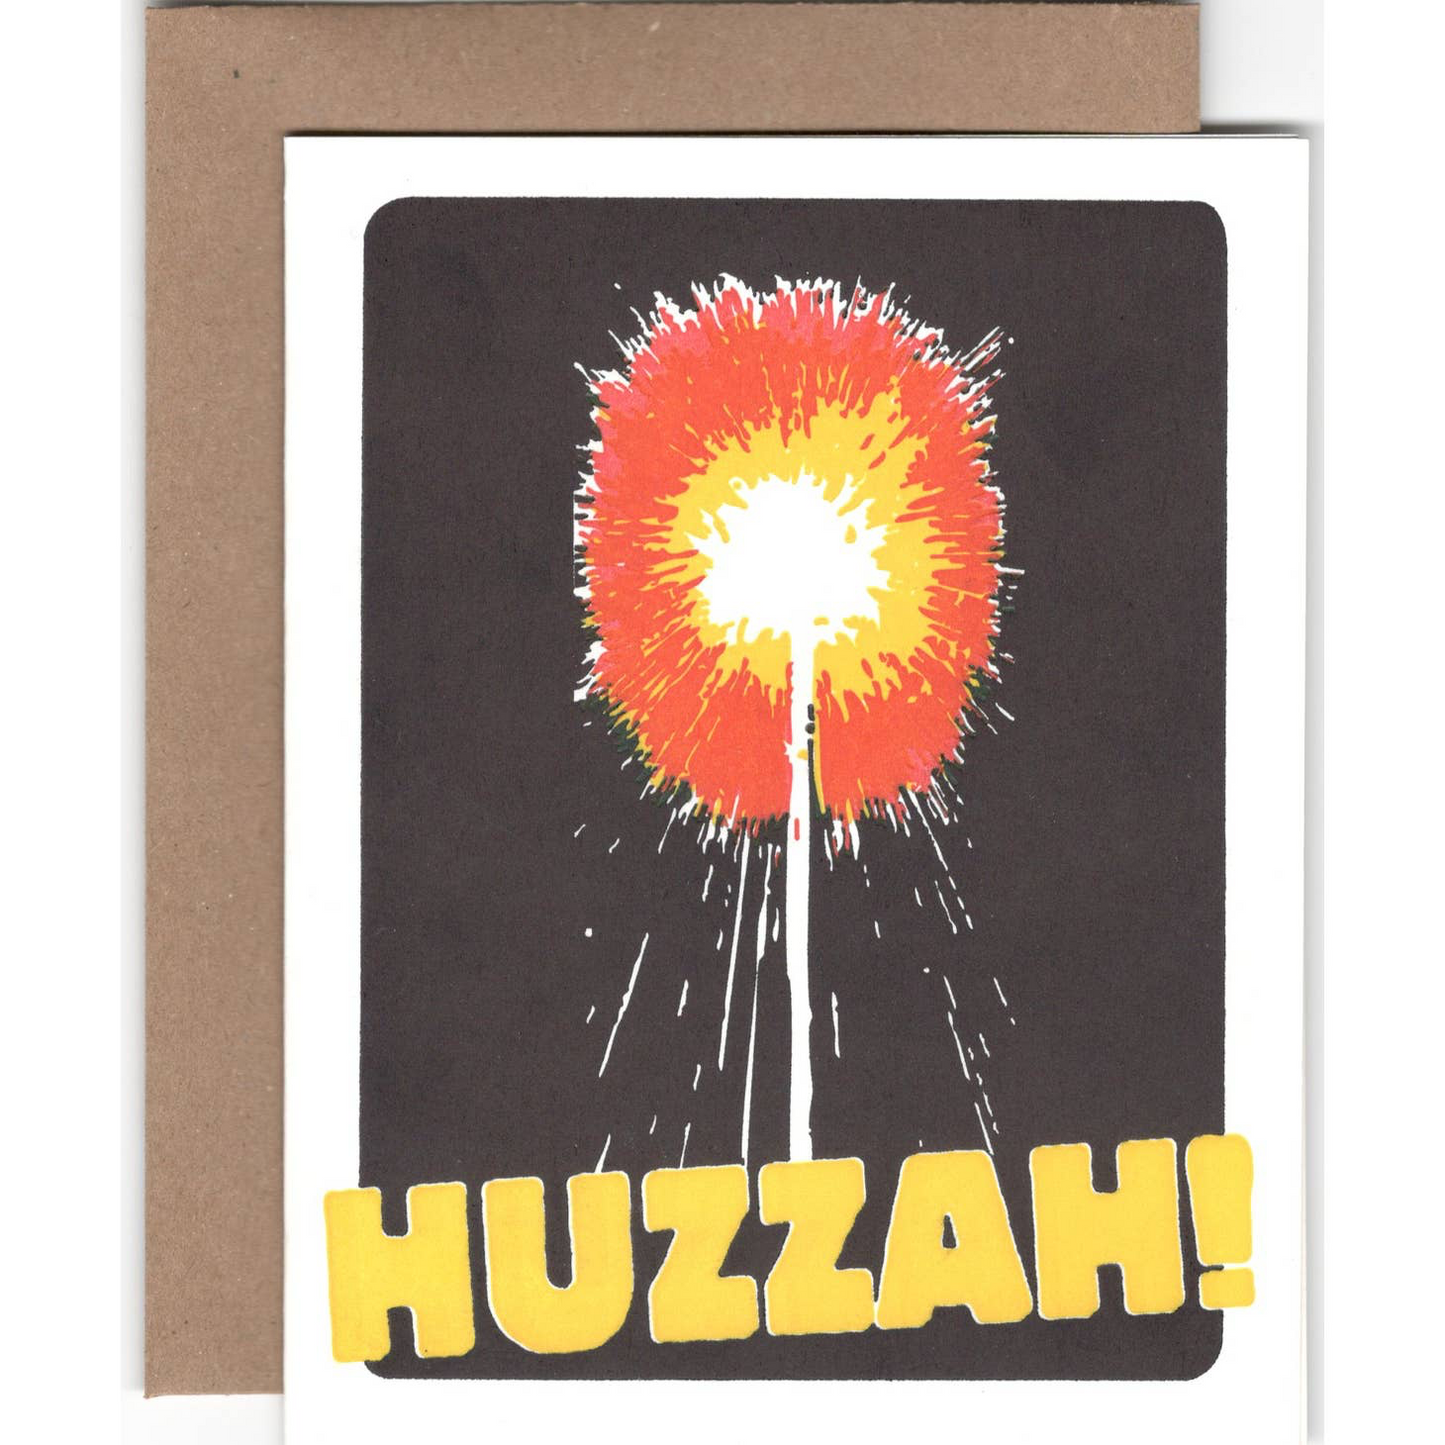 Power and Light Press - Greeting Cards